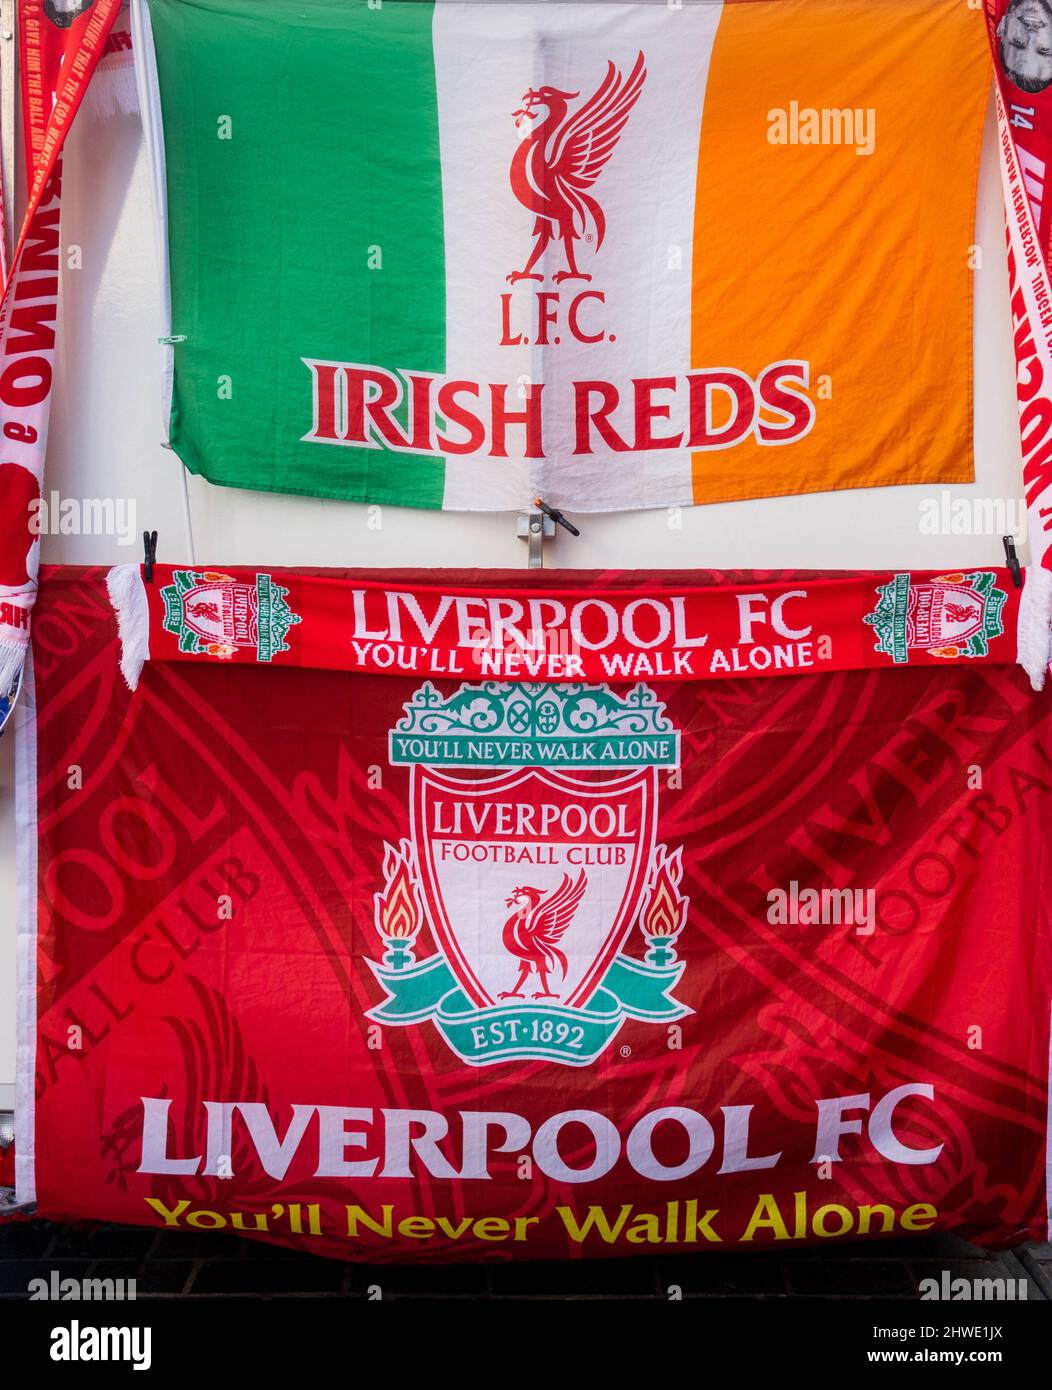 LFC Irish Reds football fan kiosk selling flags and banners Stock Photo